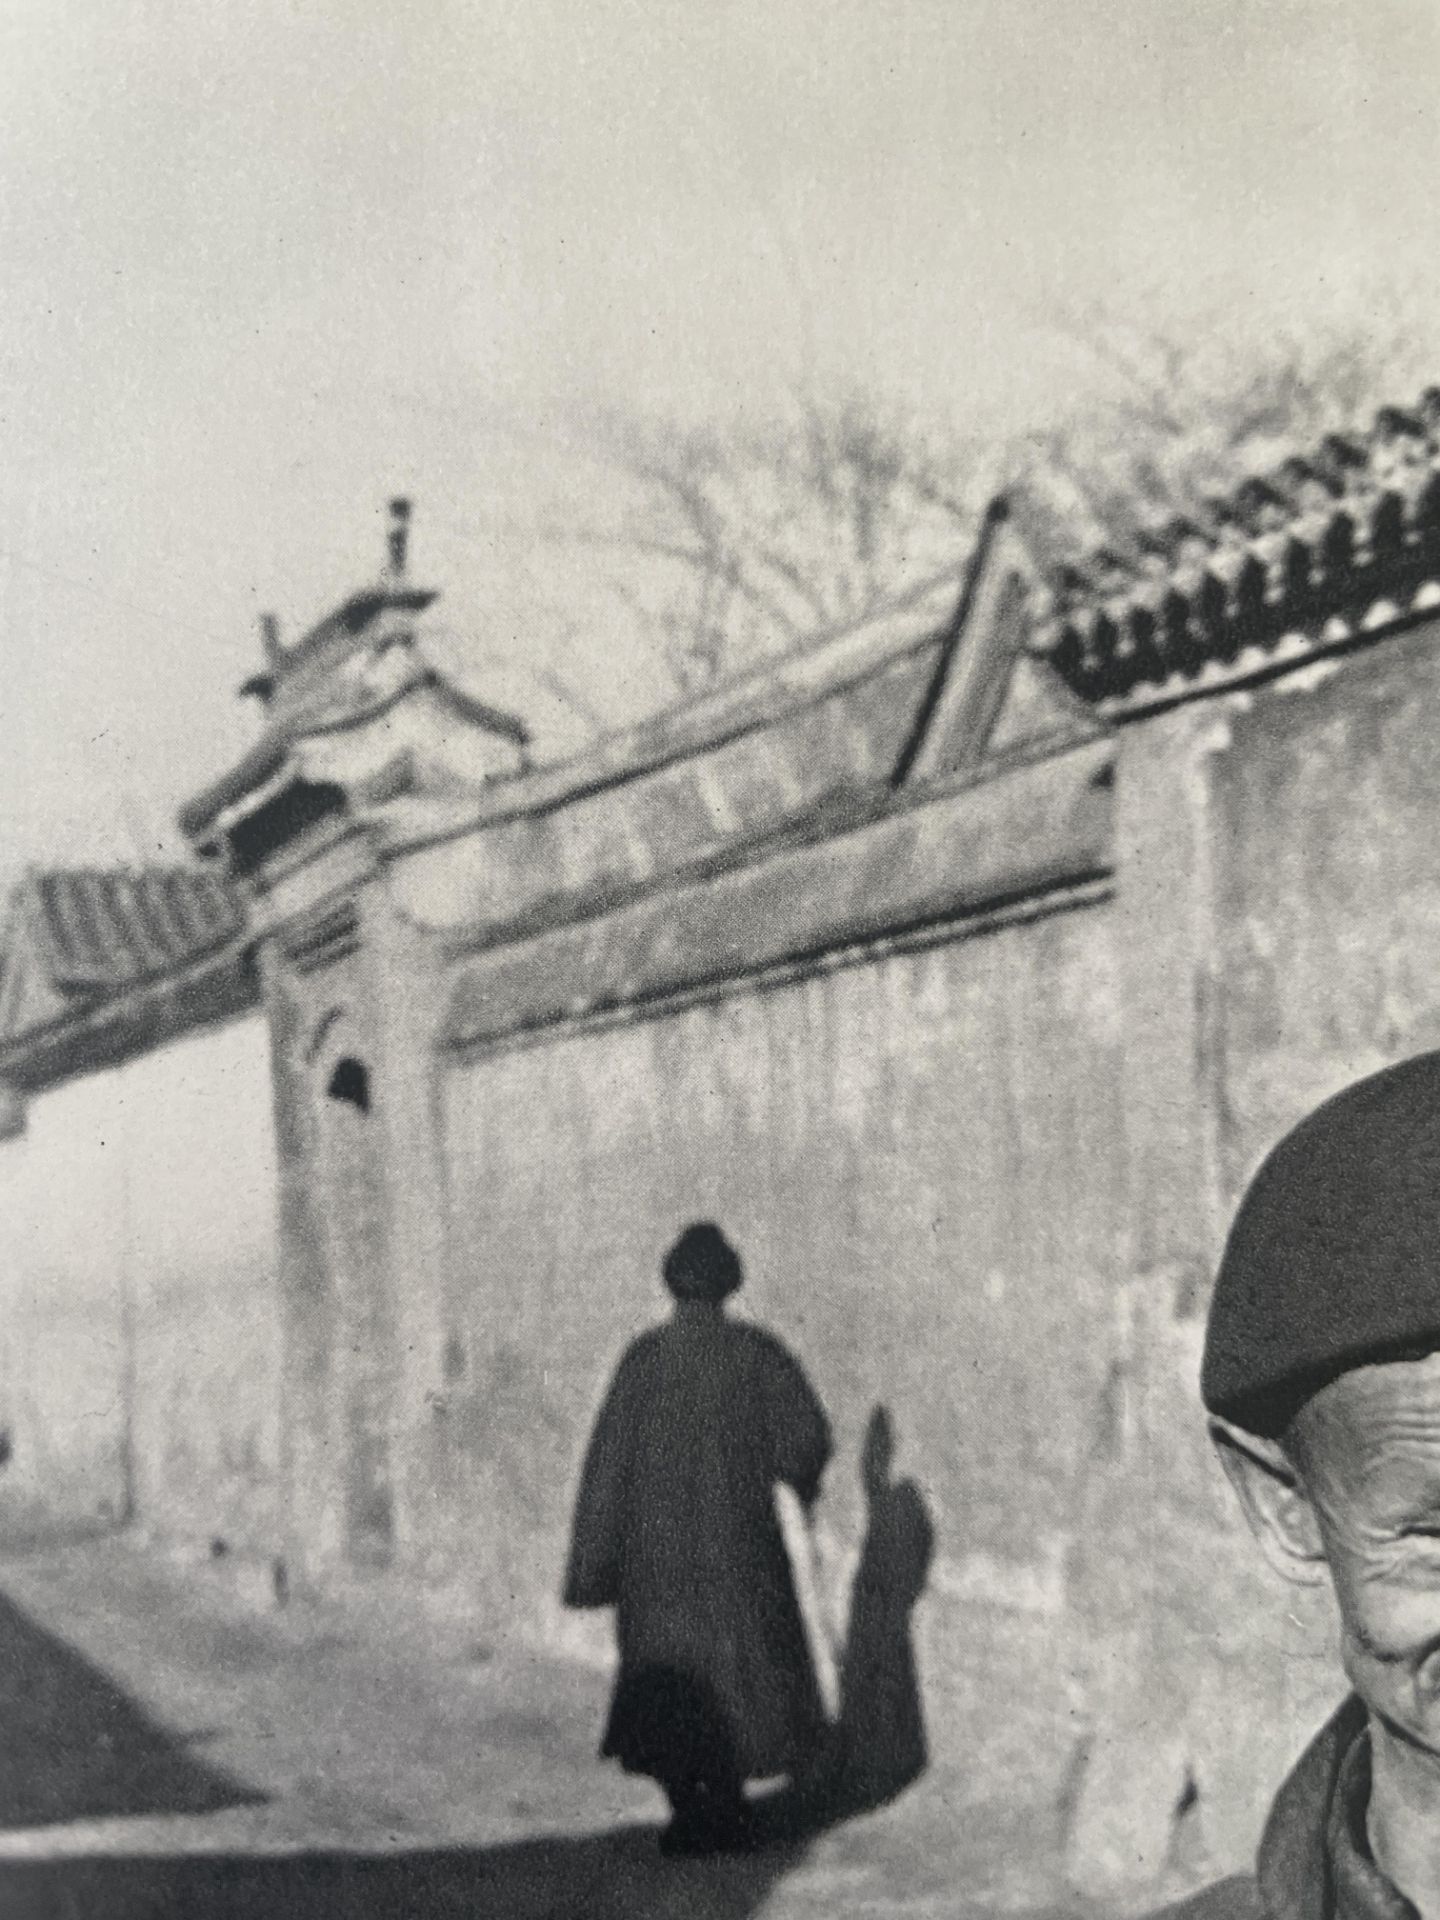 Henri Cartier Bresson â€œEunuch, Former Servant in the Imperial Court of the Last Dynasty, Peking, 1 - Image 5 of 6